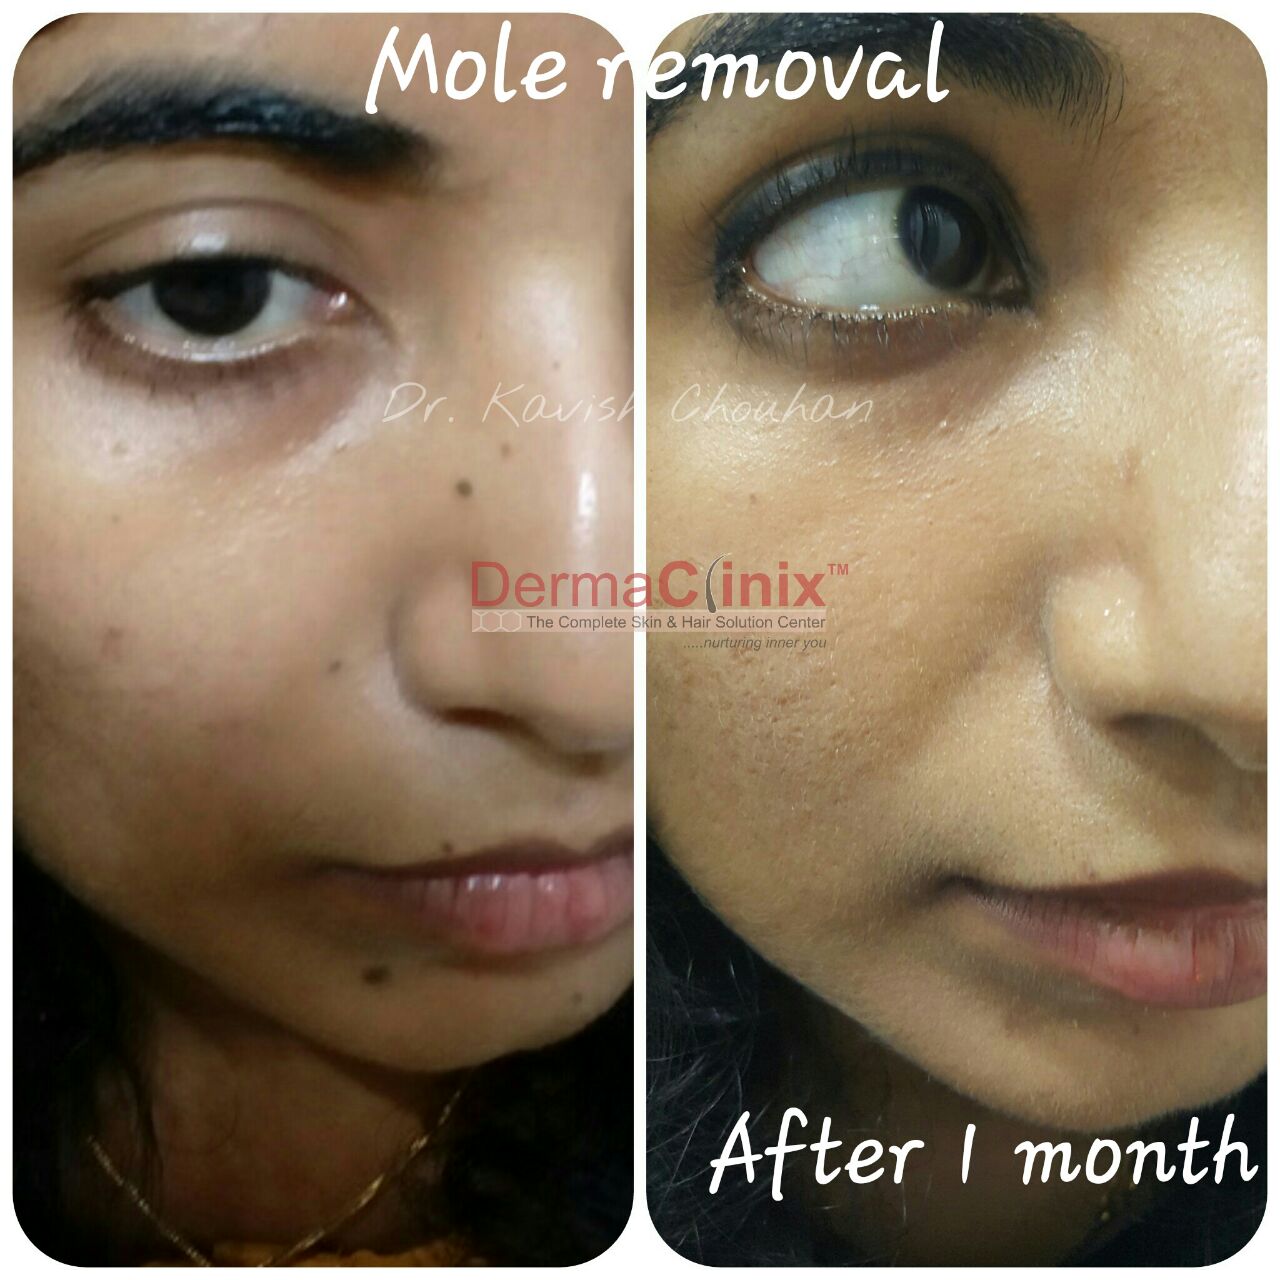 Wart Treatment Before After Results, Mole Removal Patient ...